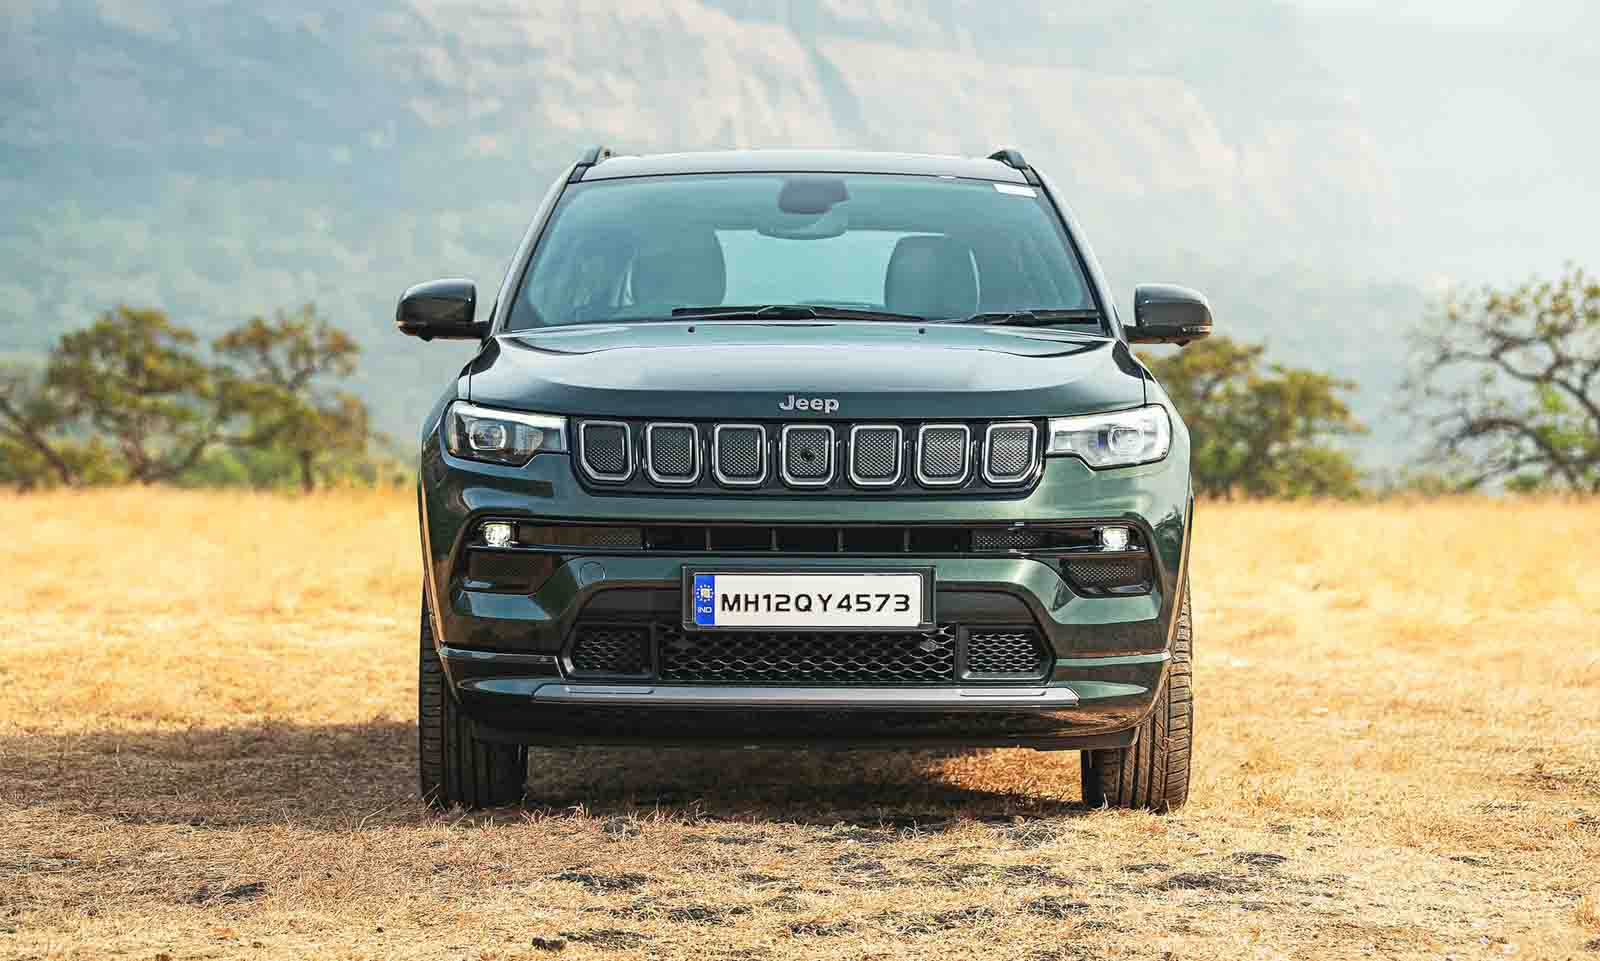 Jeep Compass Facelift Gets A Host Of New Features; Will It Revive Sales?